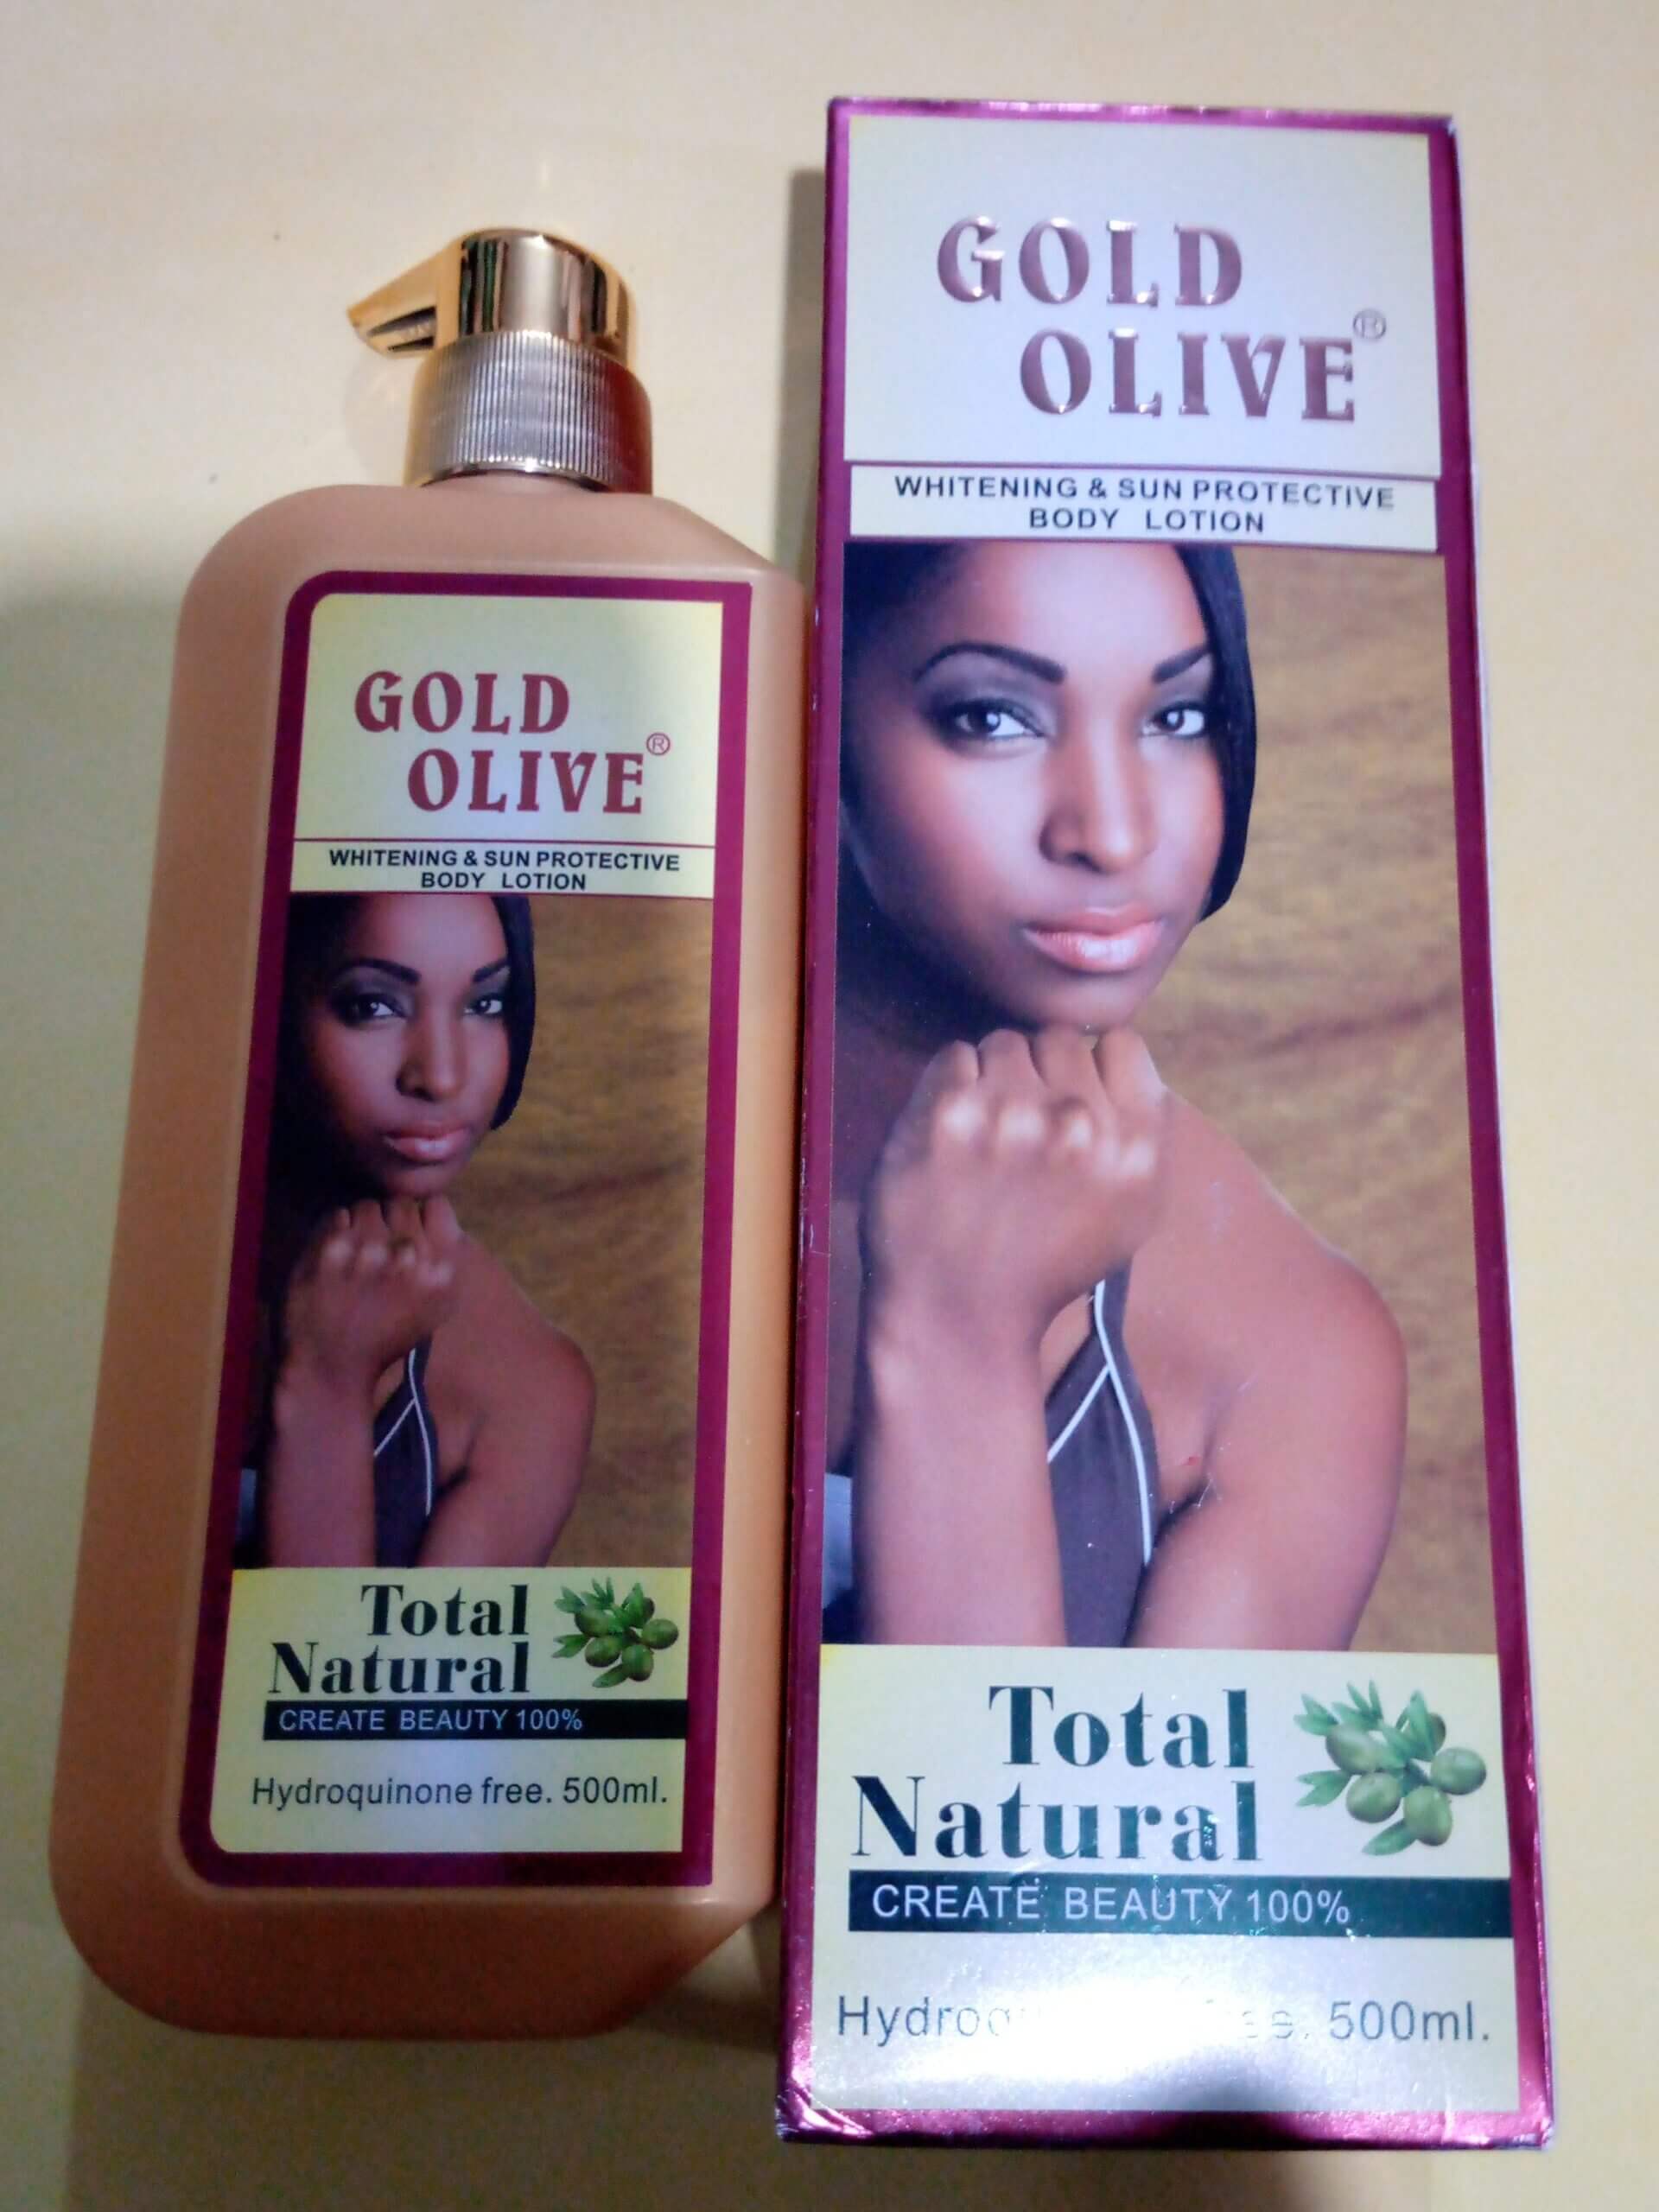 GOLD OLIVE CREAM REVIEW